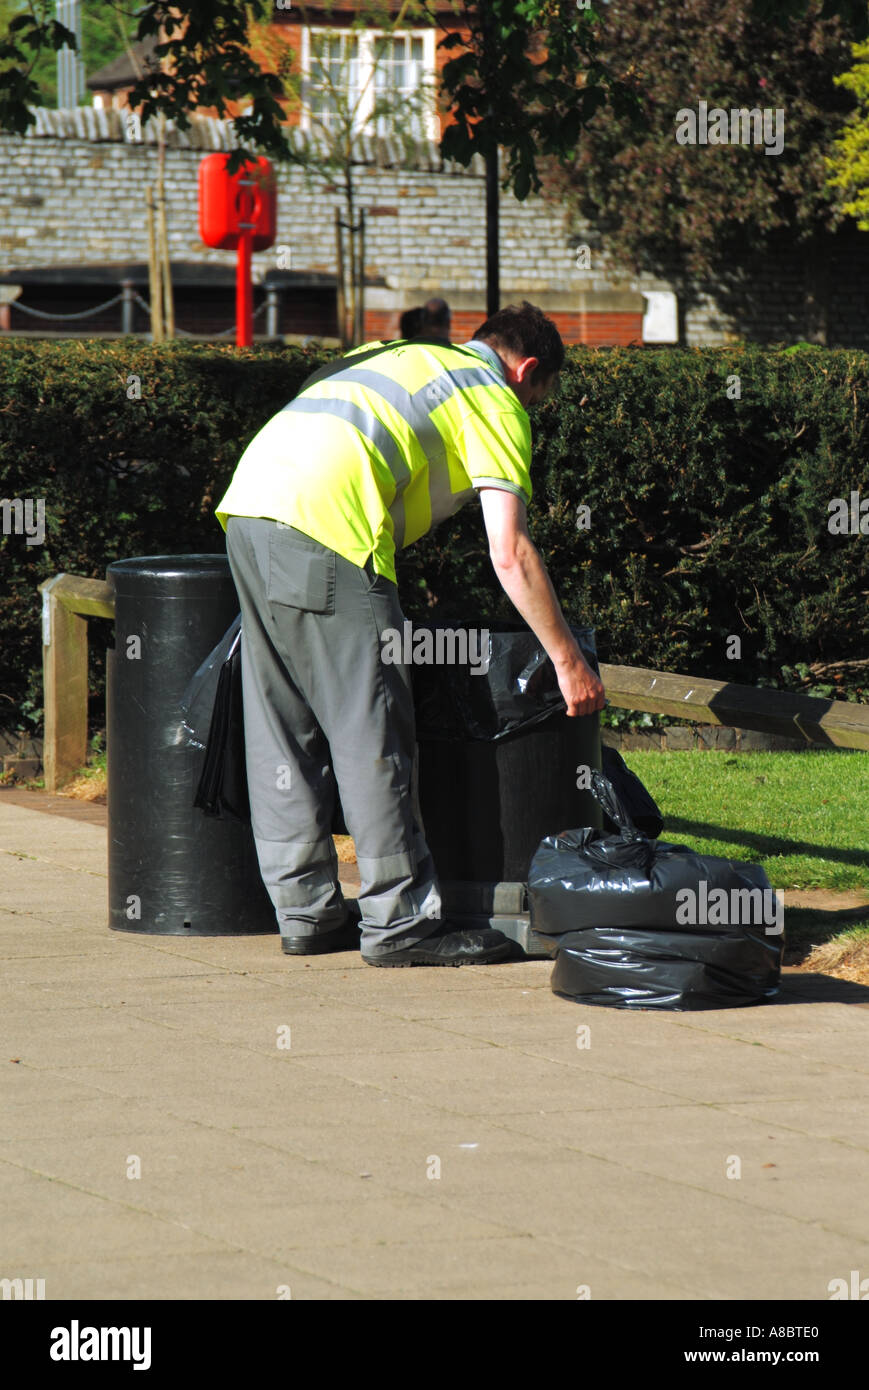 England worker removing full litter sack from bin and replacing with a new plastic sack Stock Photo